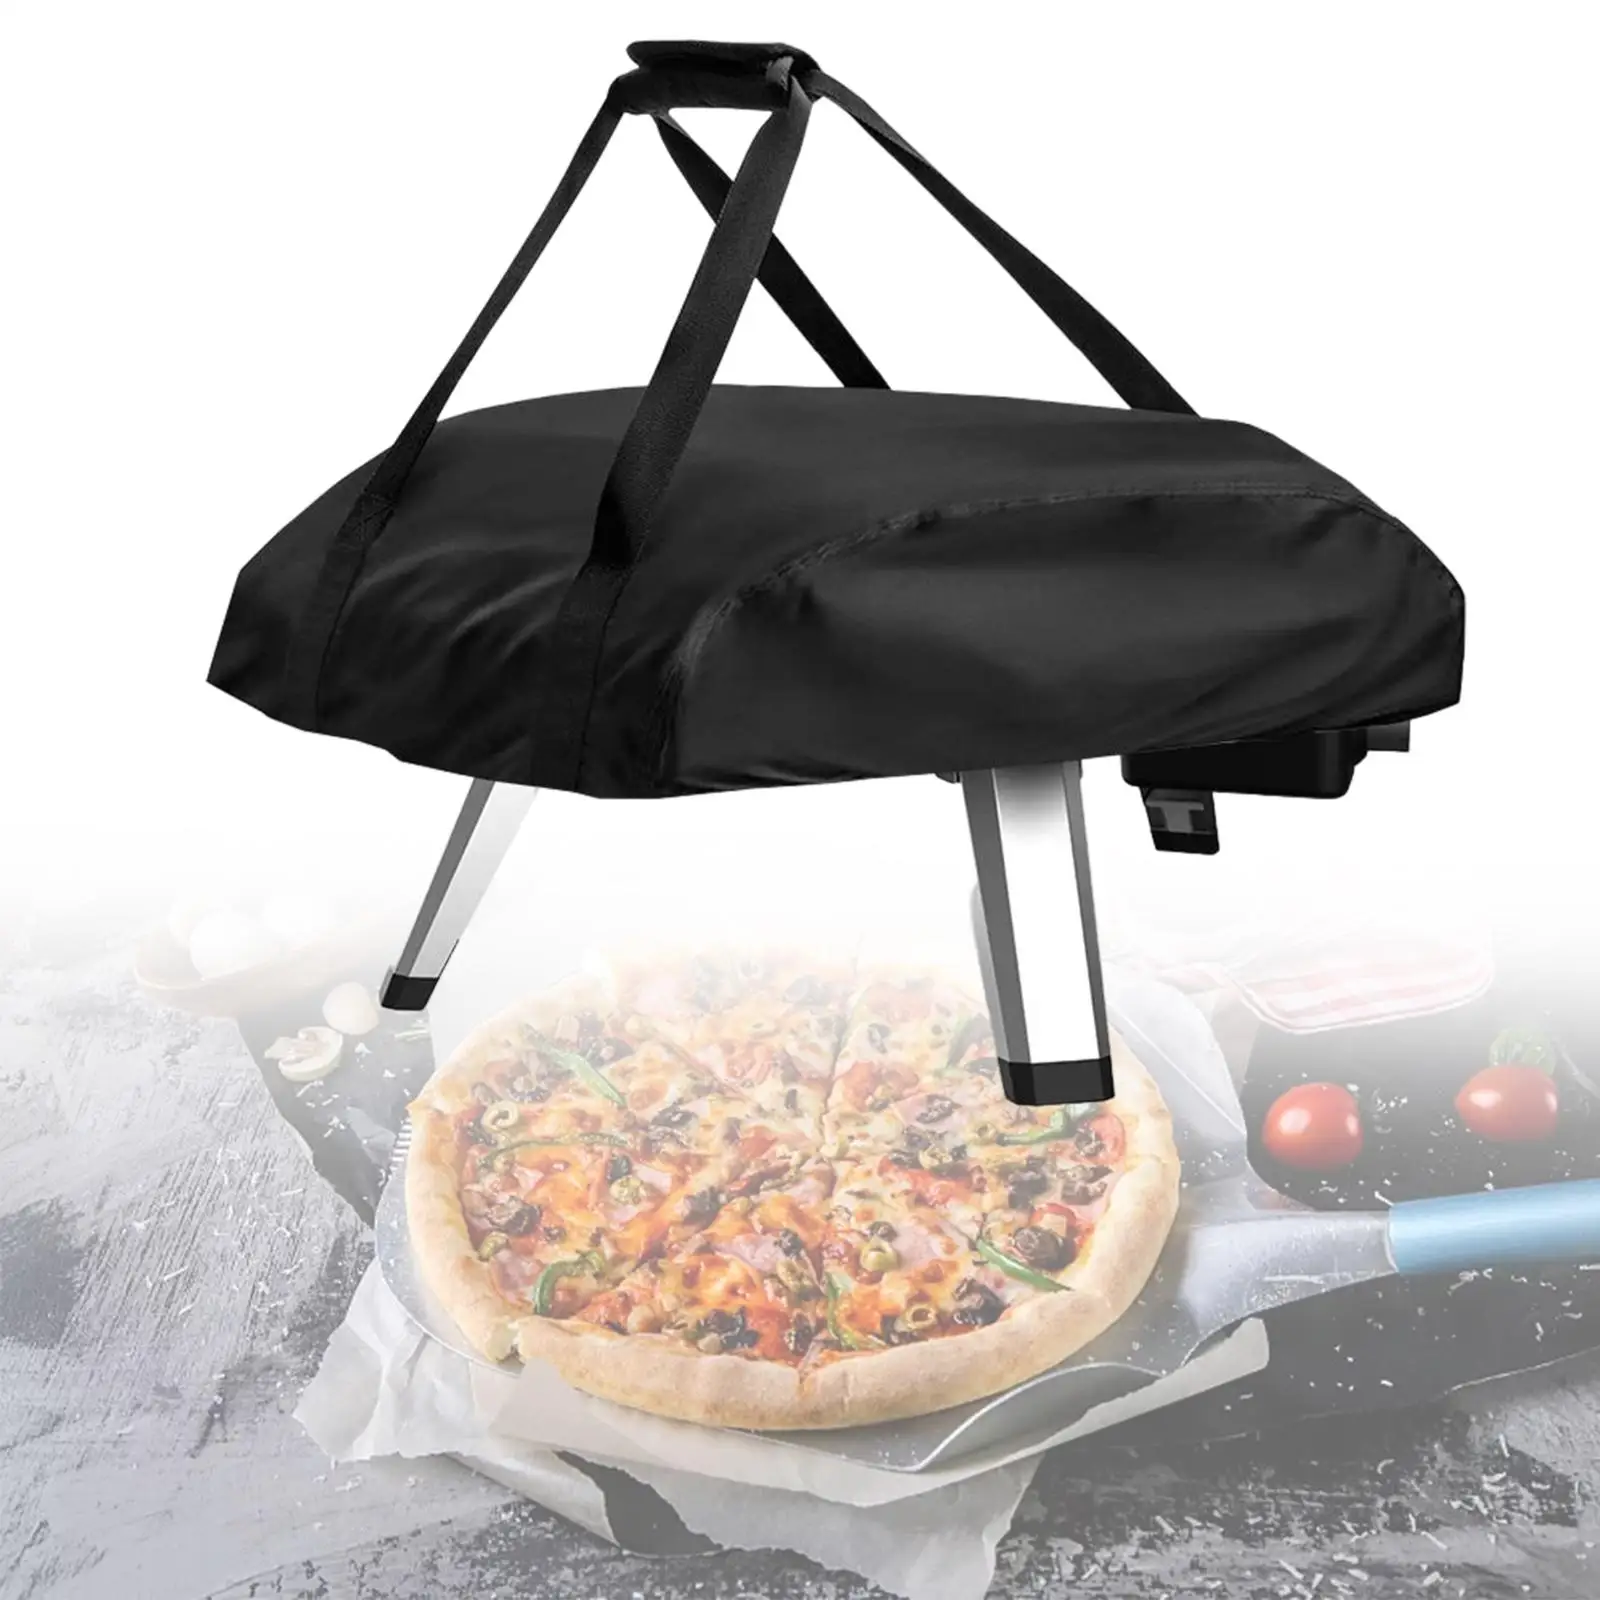 12 Pizza Oven cover with 2 Adjustable Webbing Dustproof Windproof Accessories Supply High Strength for Patio